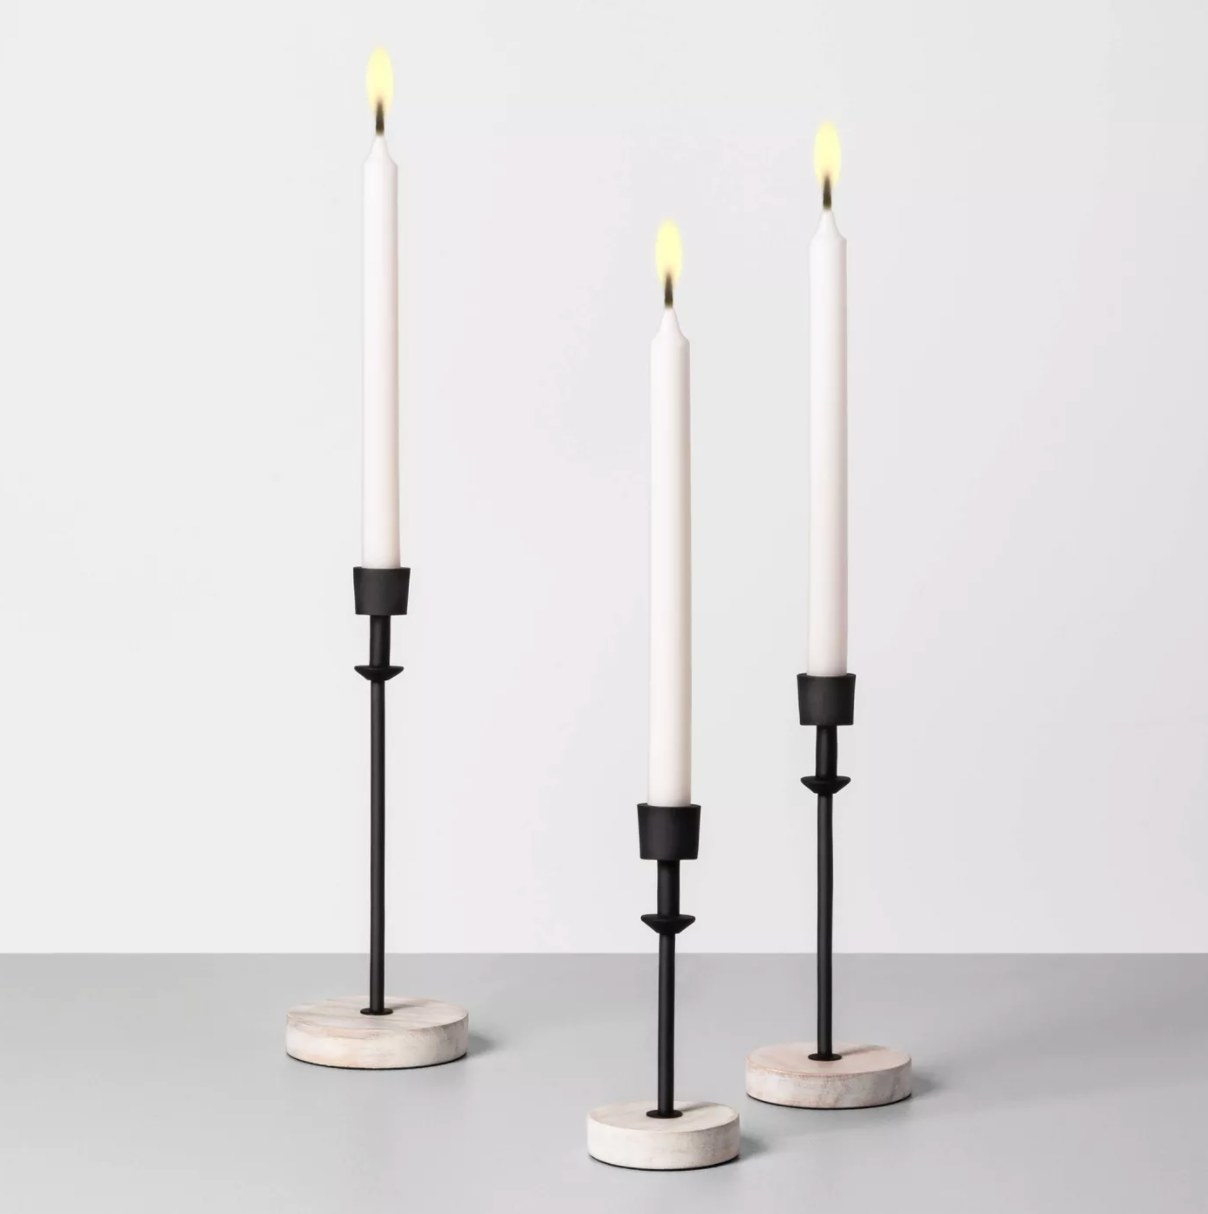 The single wood and metal candle holder